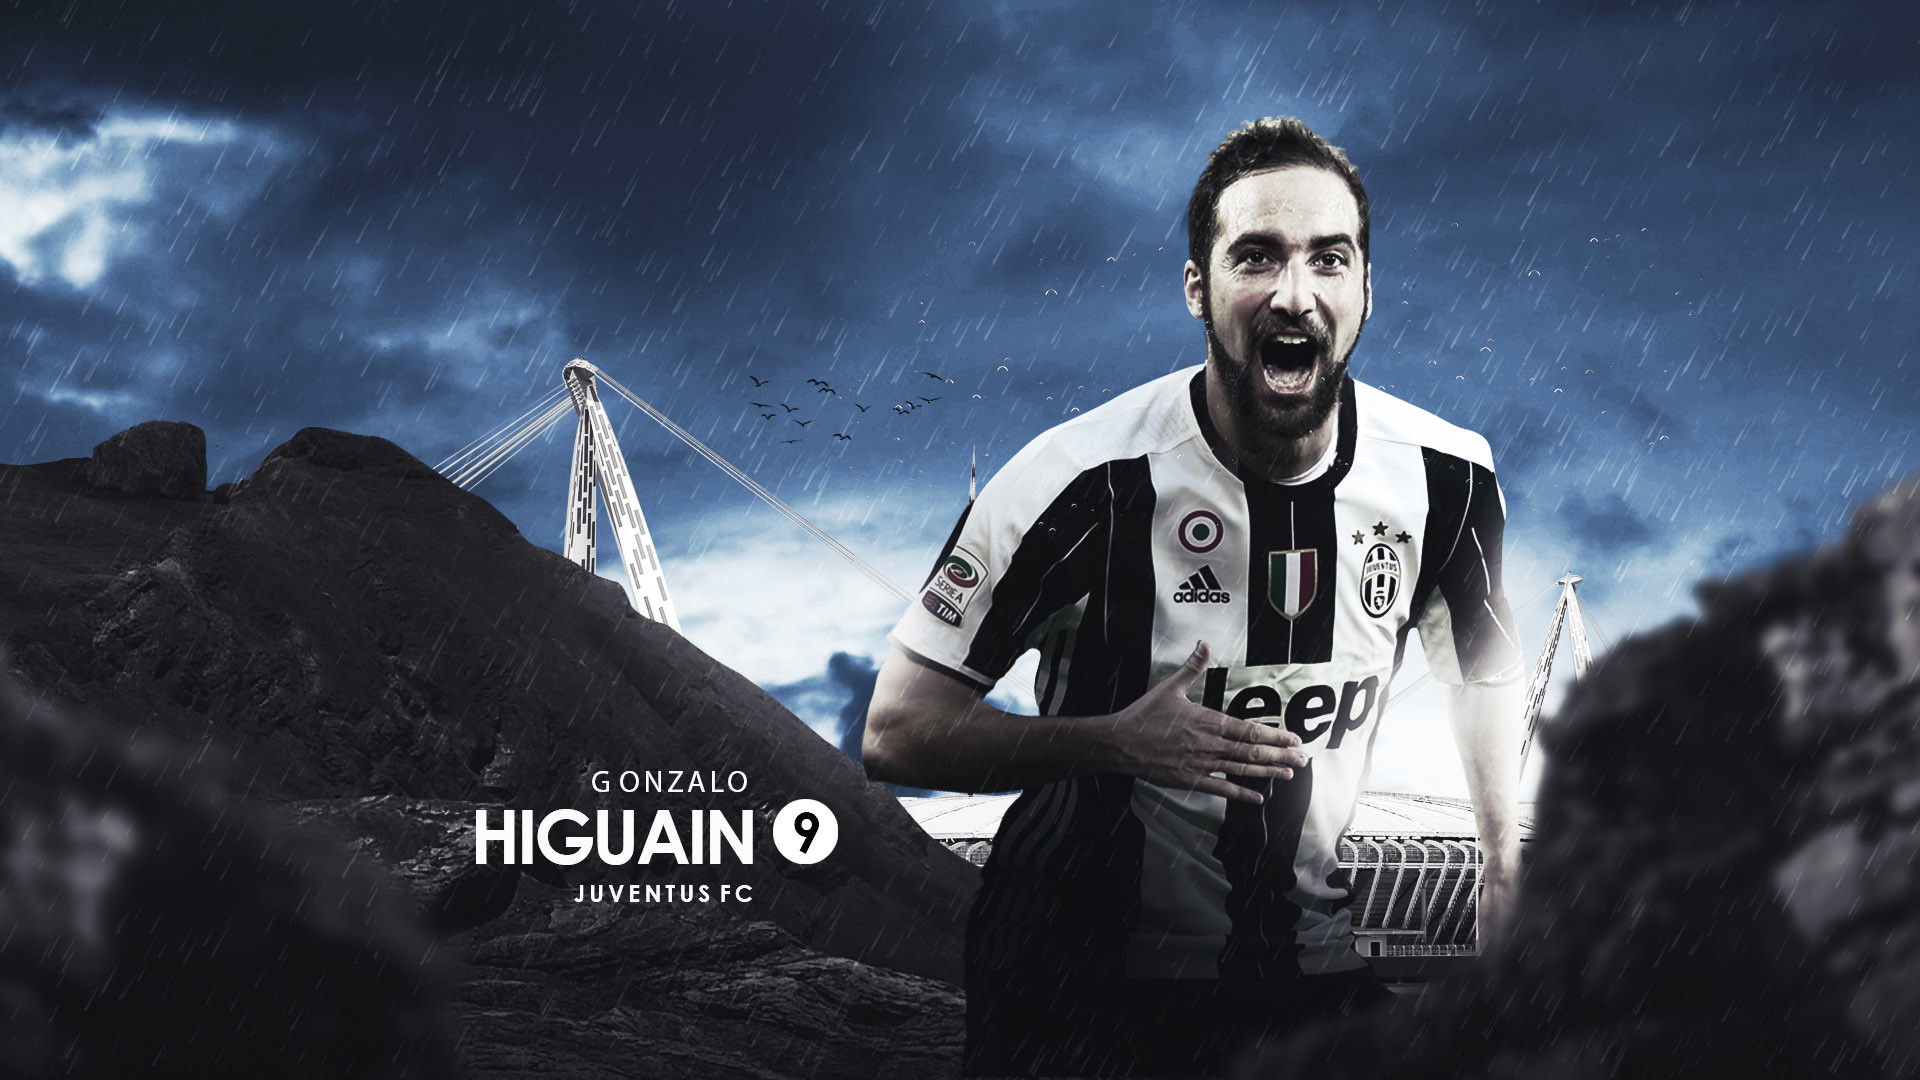 1920x1080 Search Results for “higuain wallpapers” – Adorable Wallpapers